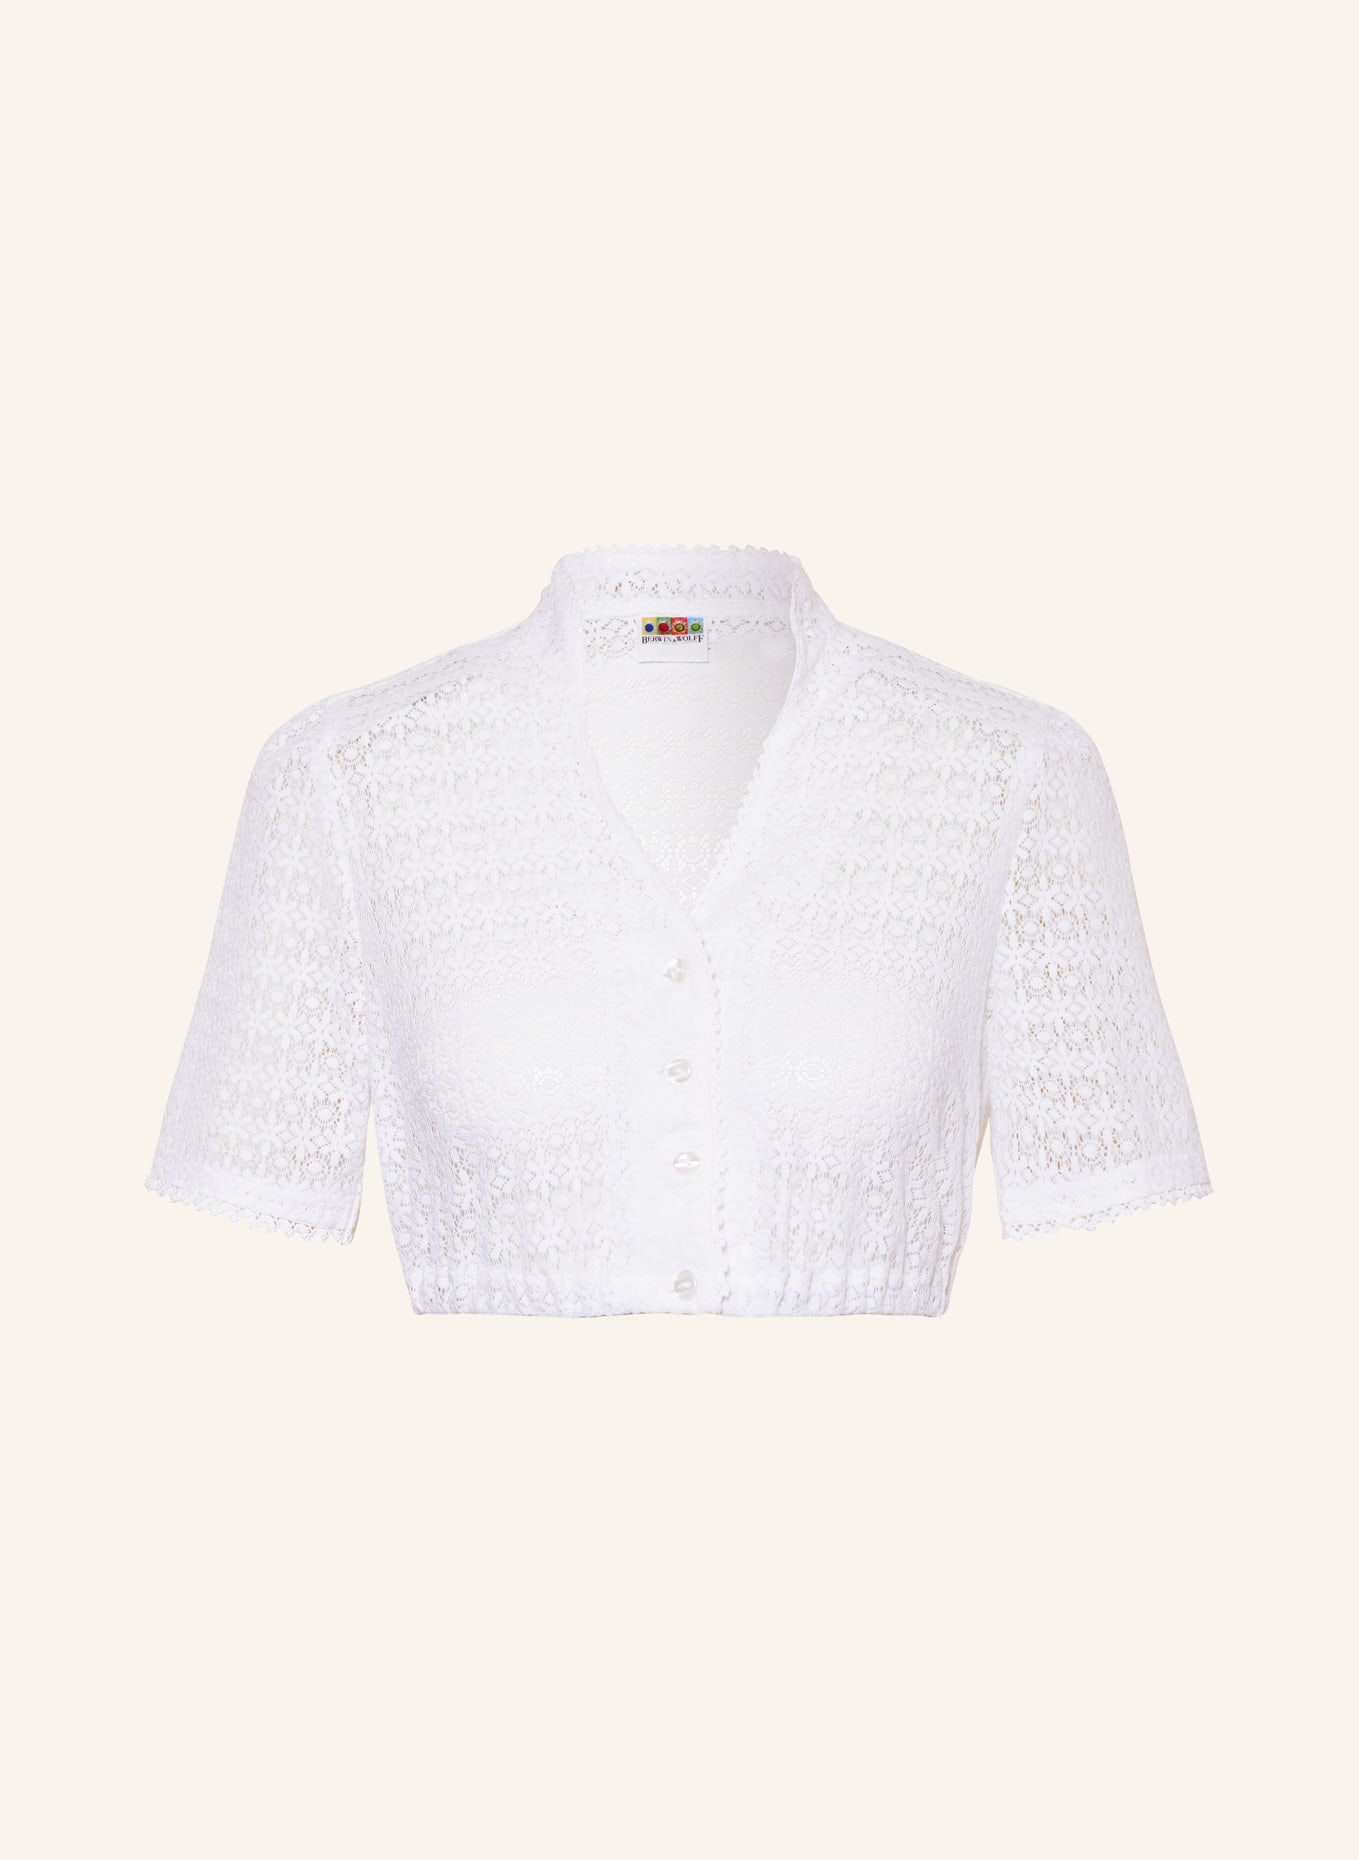 BERWIN & WOLFF Dirndl blouse made of lace, Color: WHITE (Image 1)